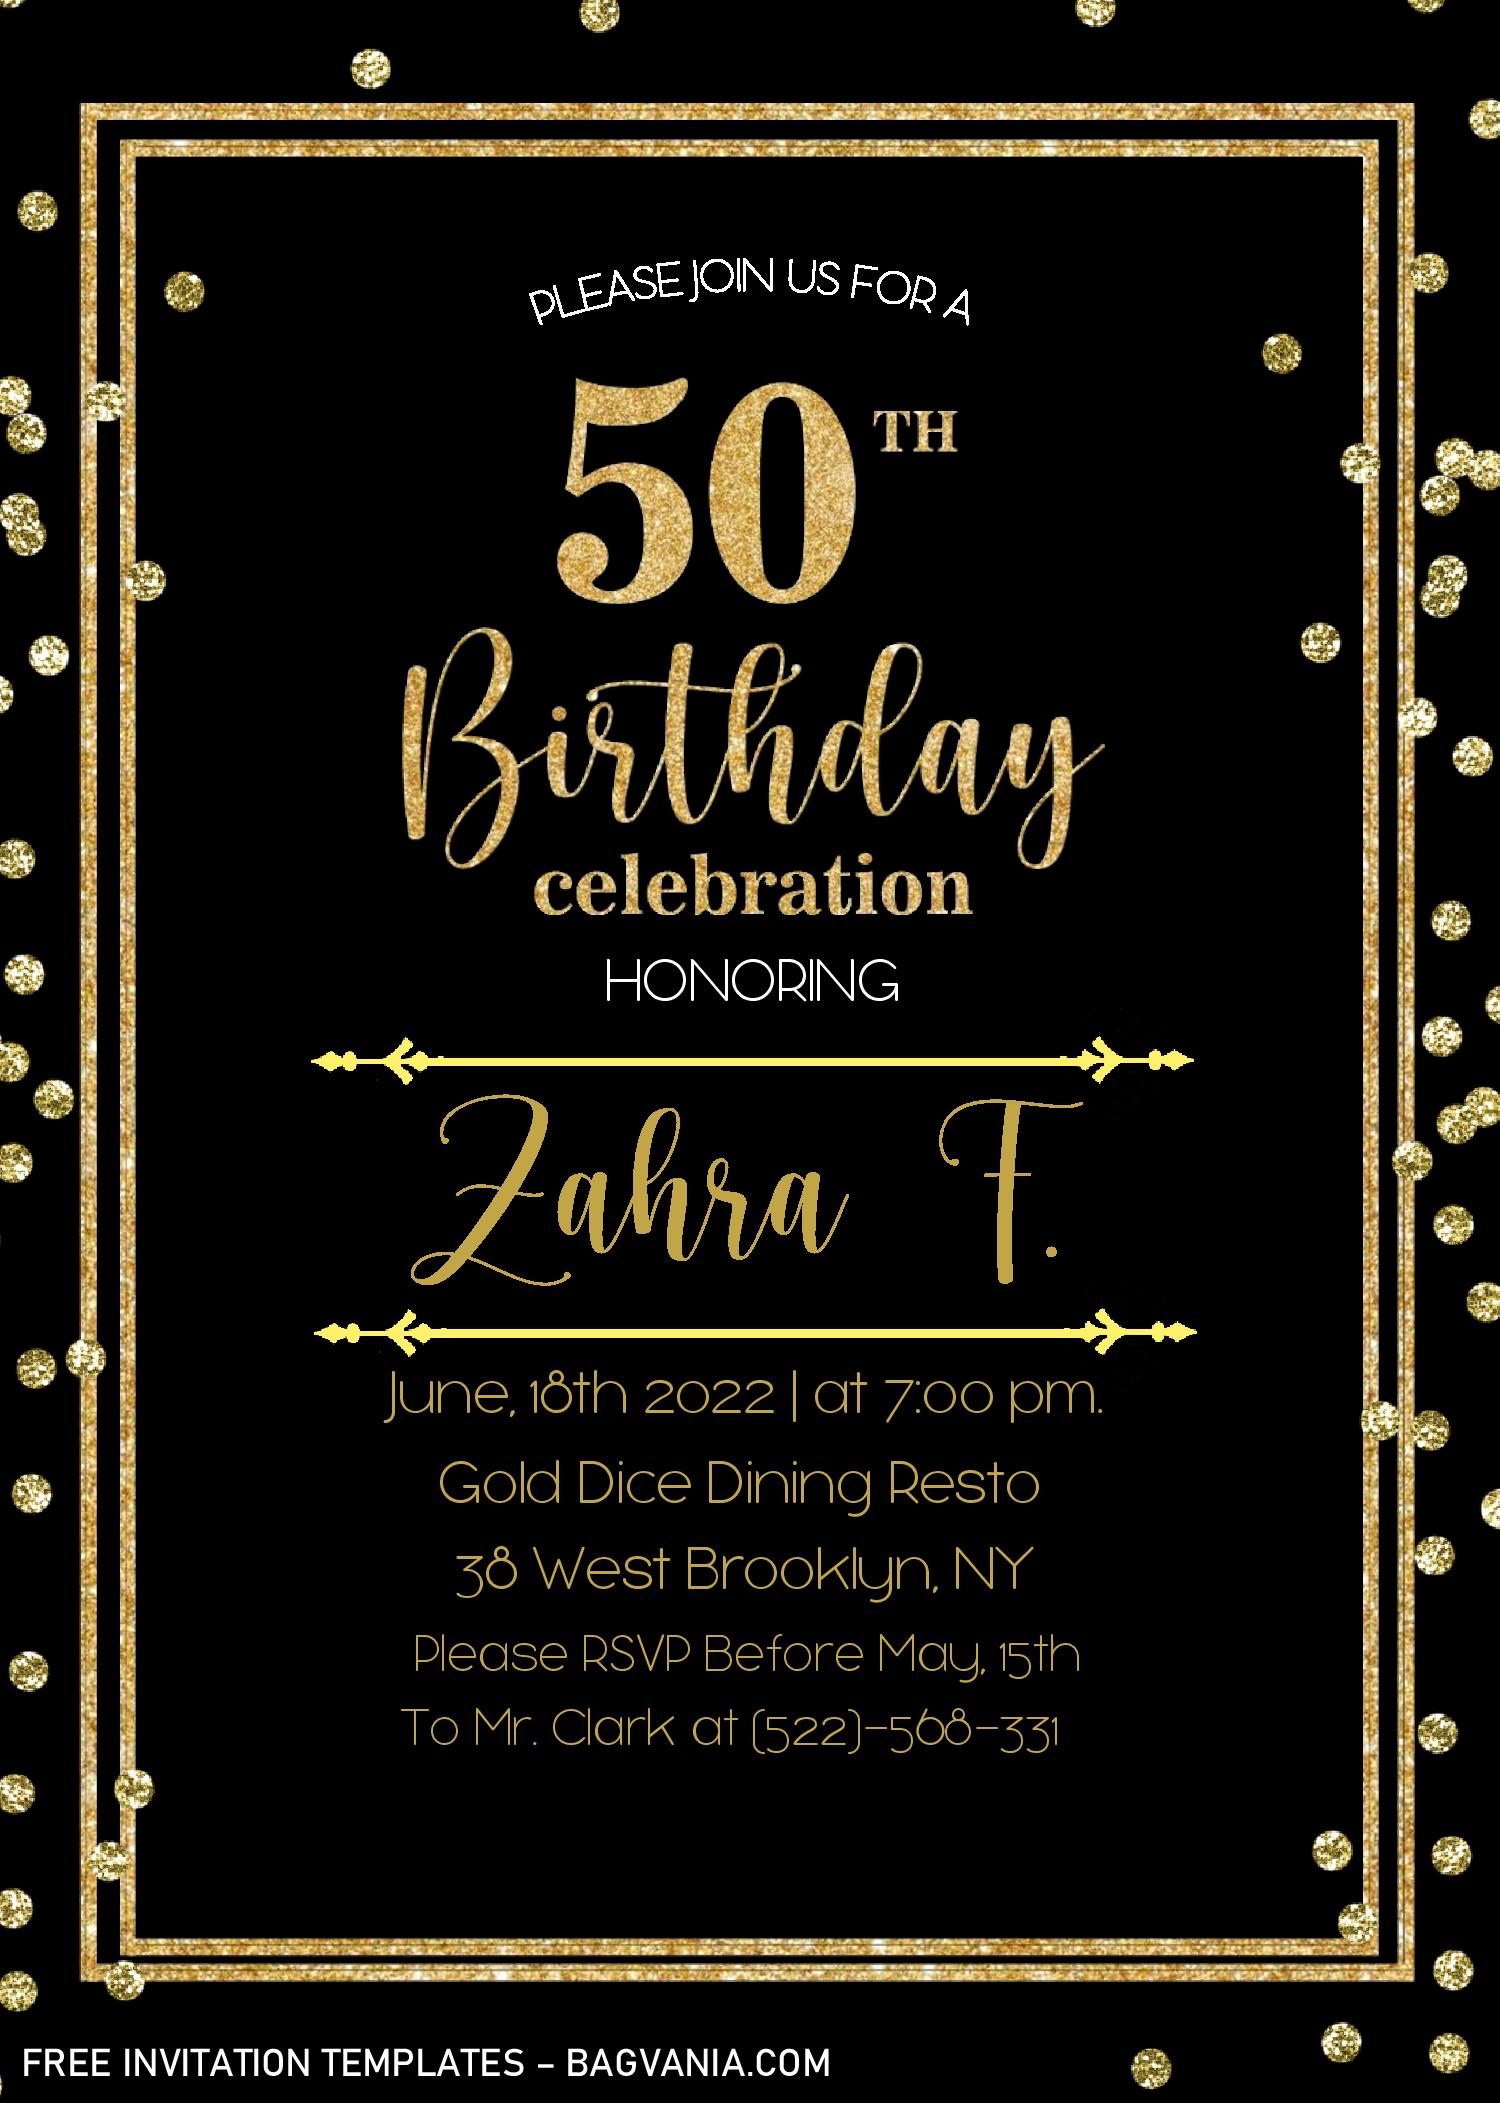 Black And Gold 50th Birthday Invitation Templates – Editable With MS